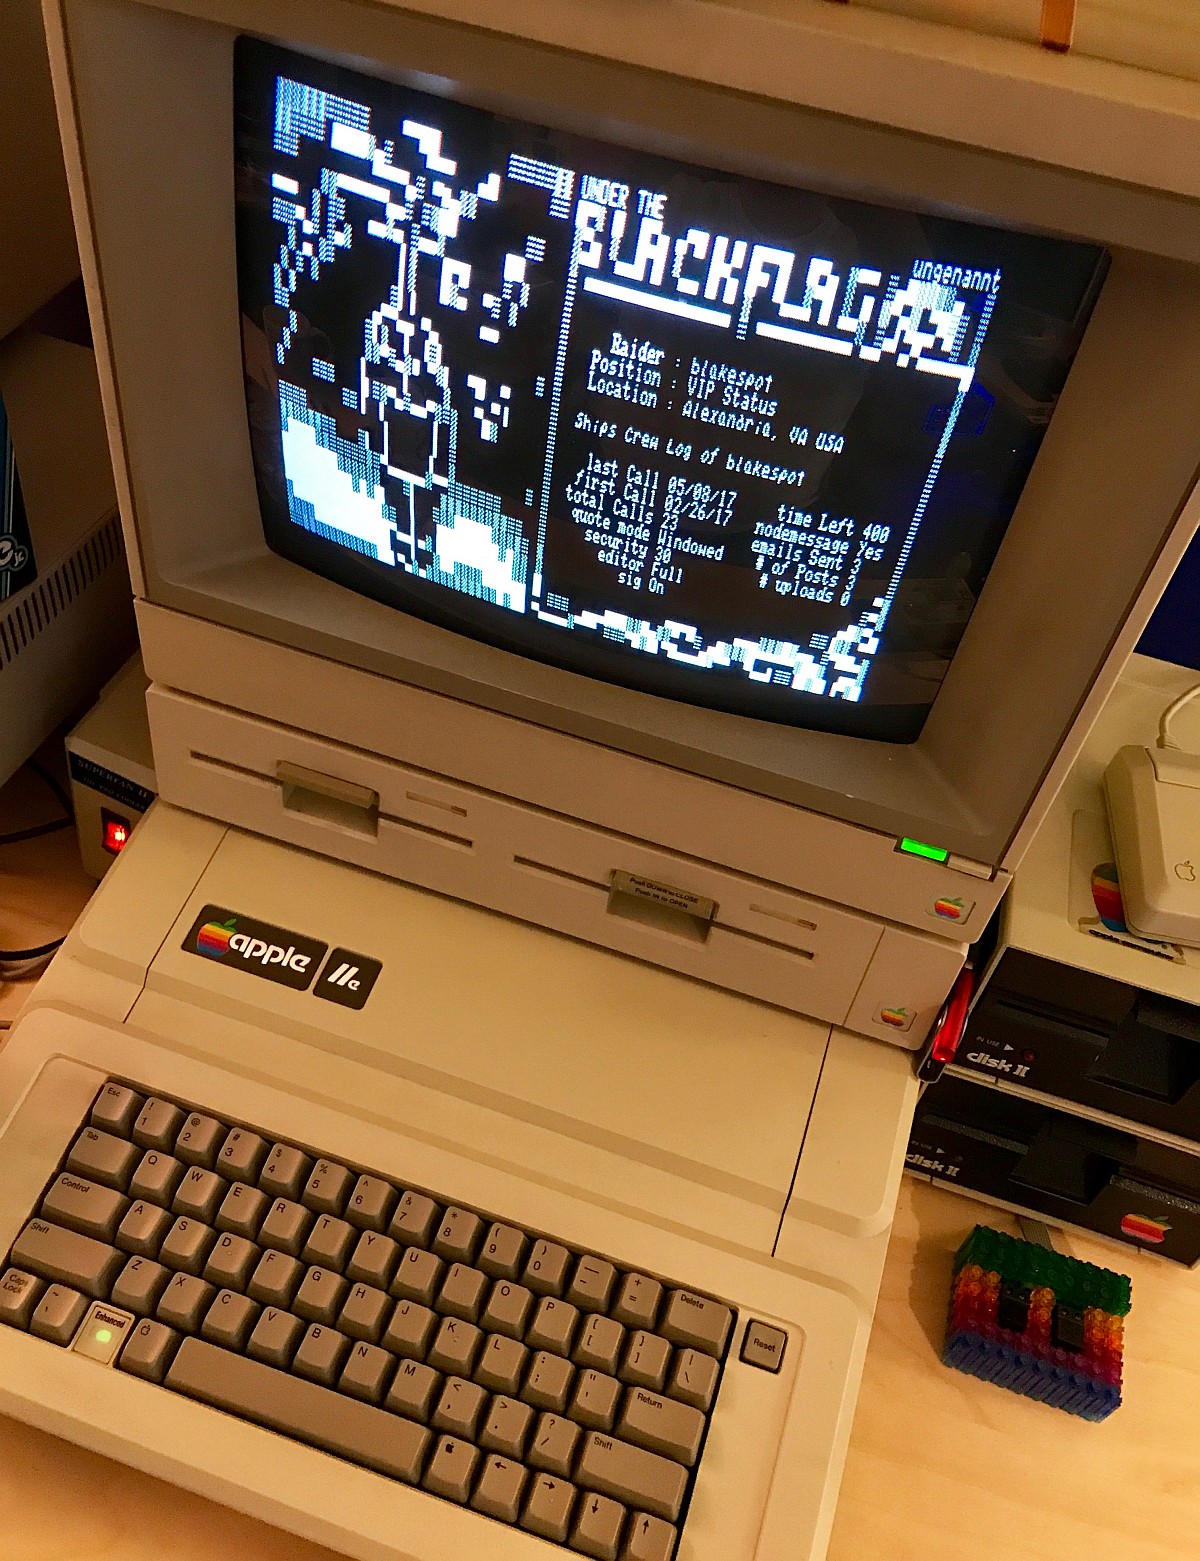 Picture of an Apple IIe computer